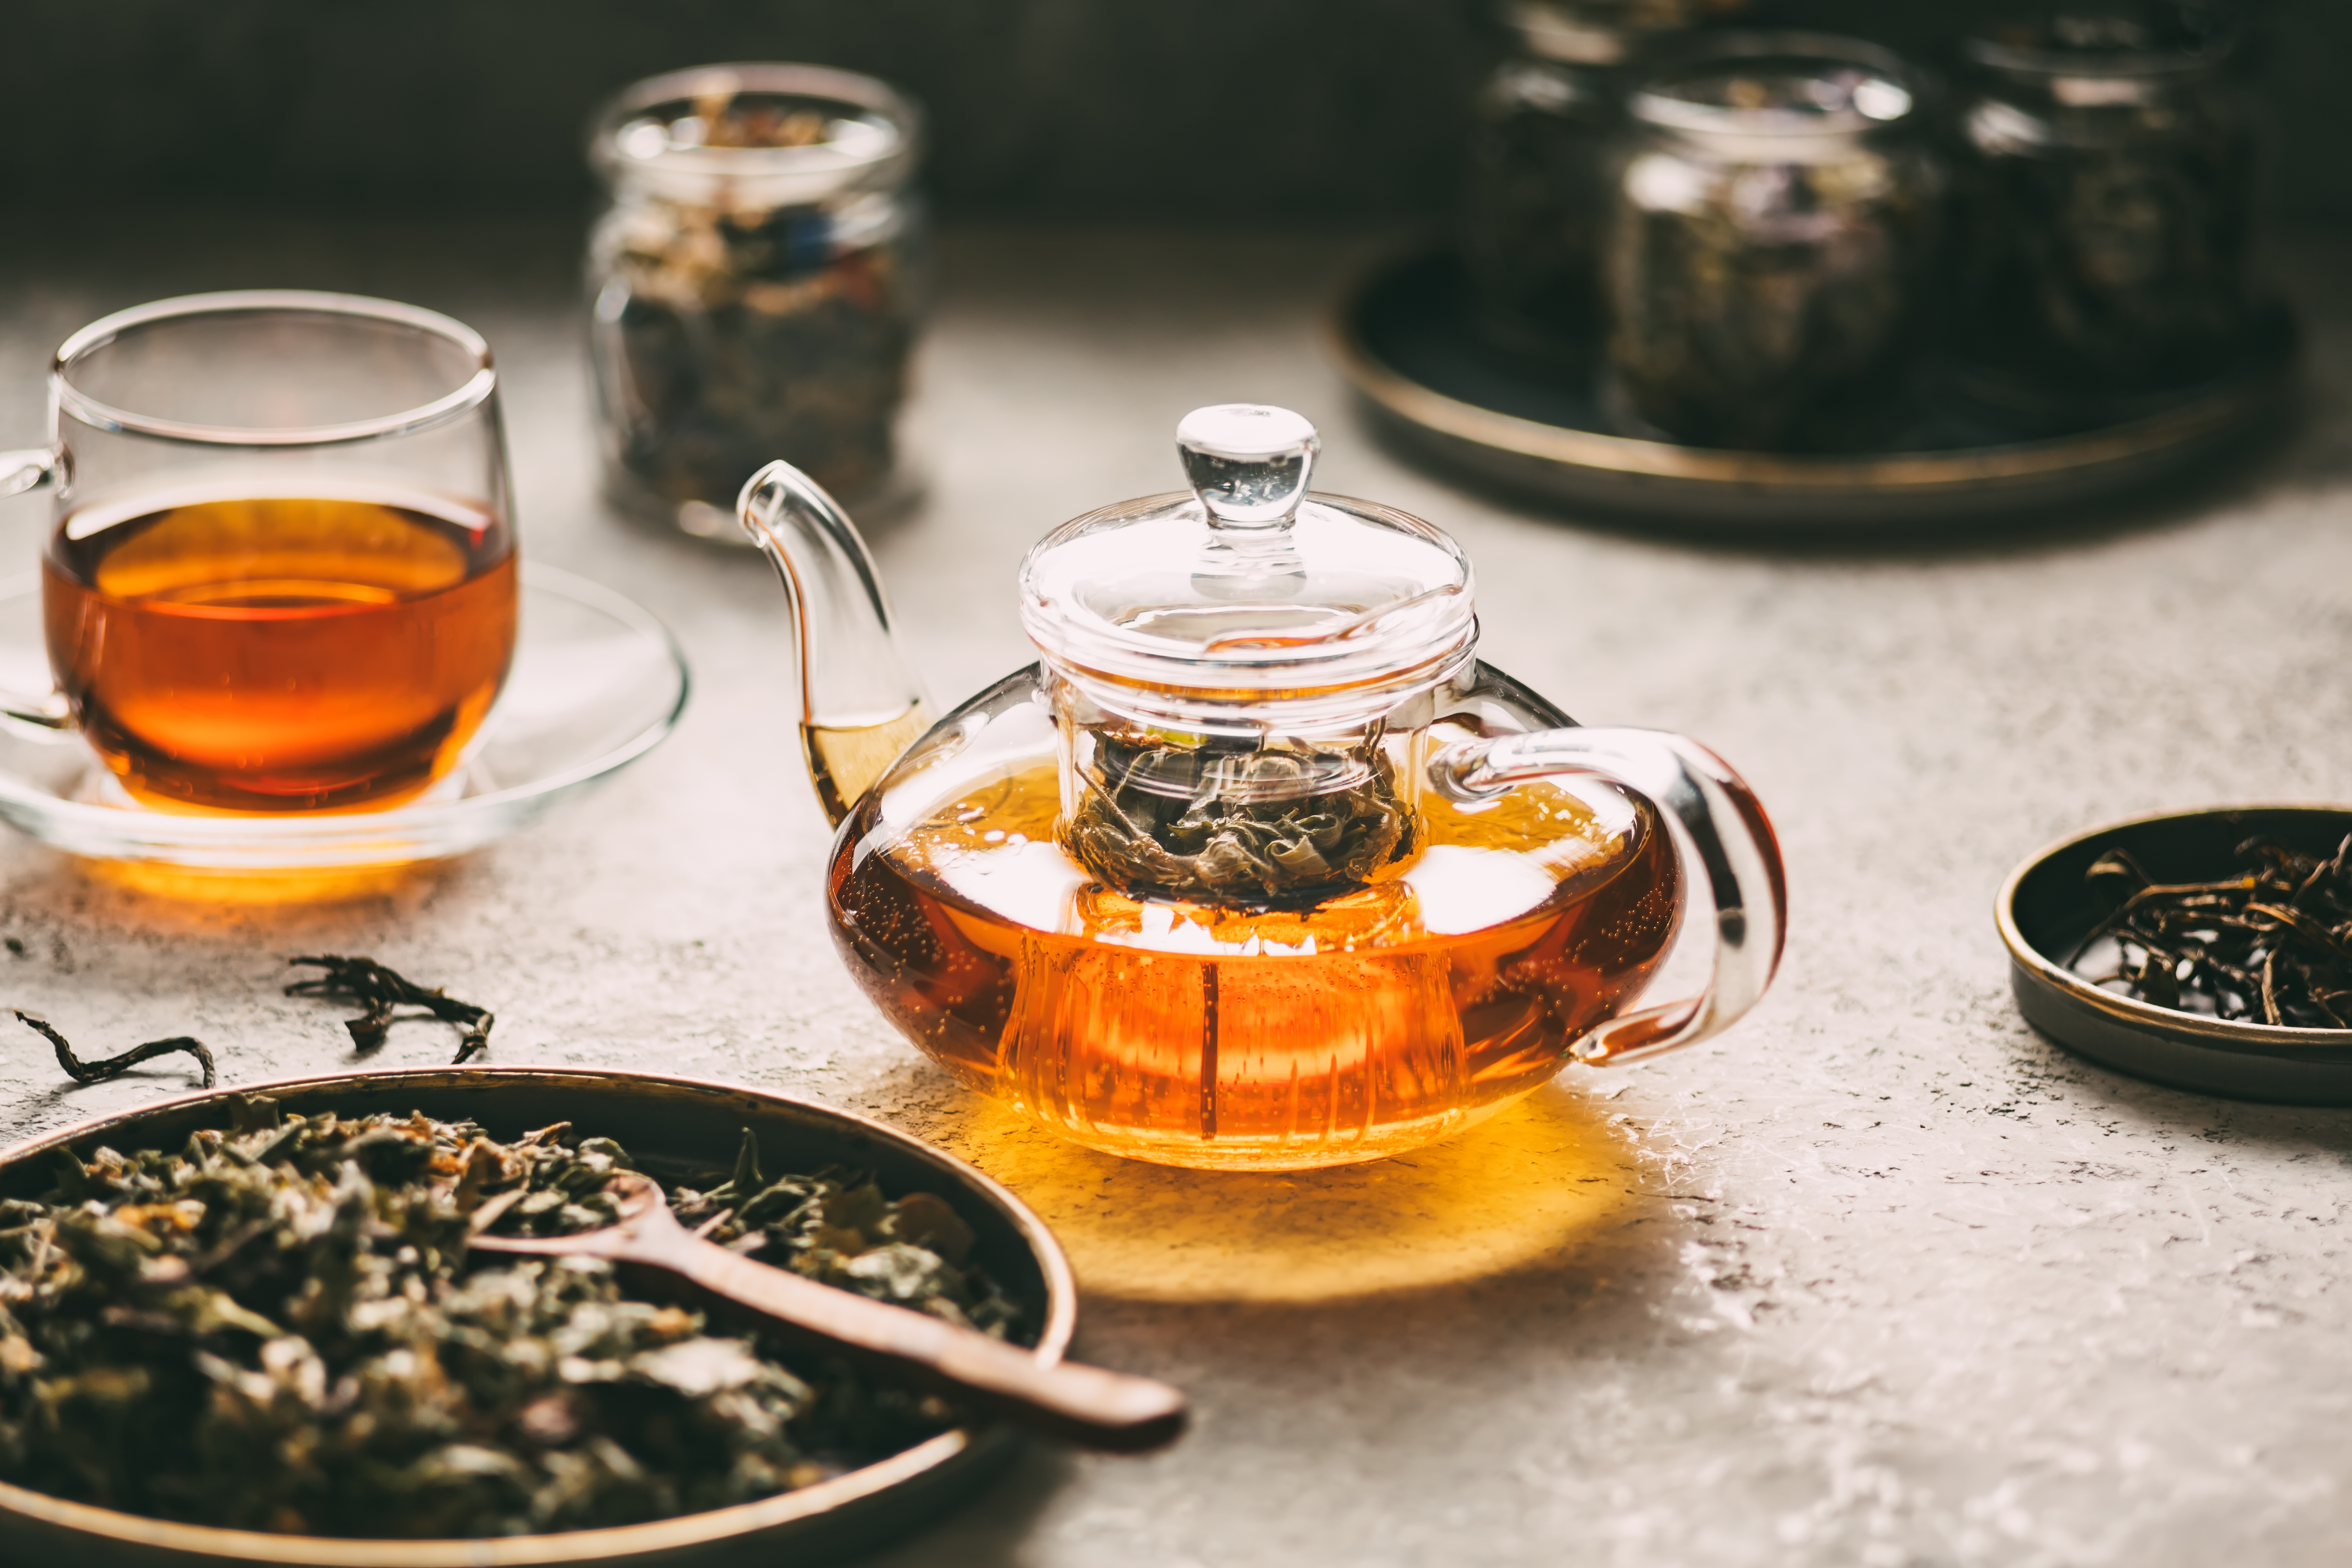 Teapot with fresh tea from different herbs